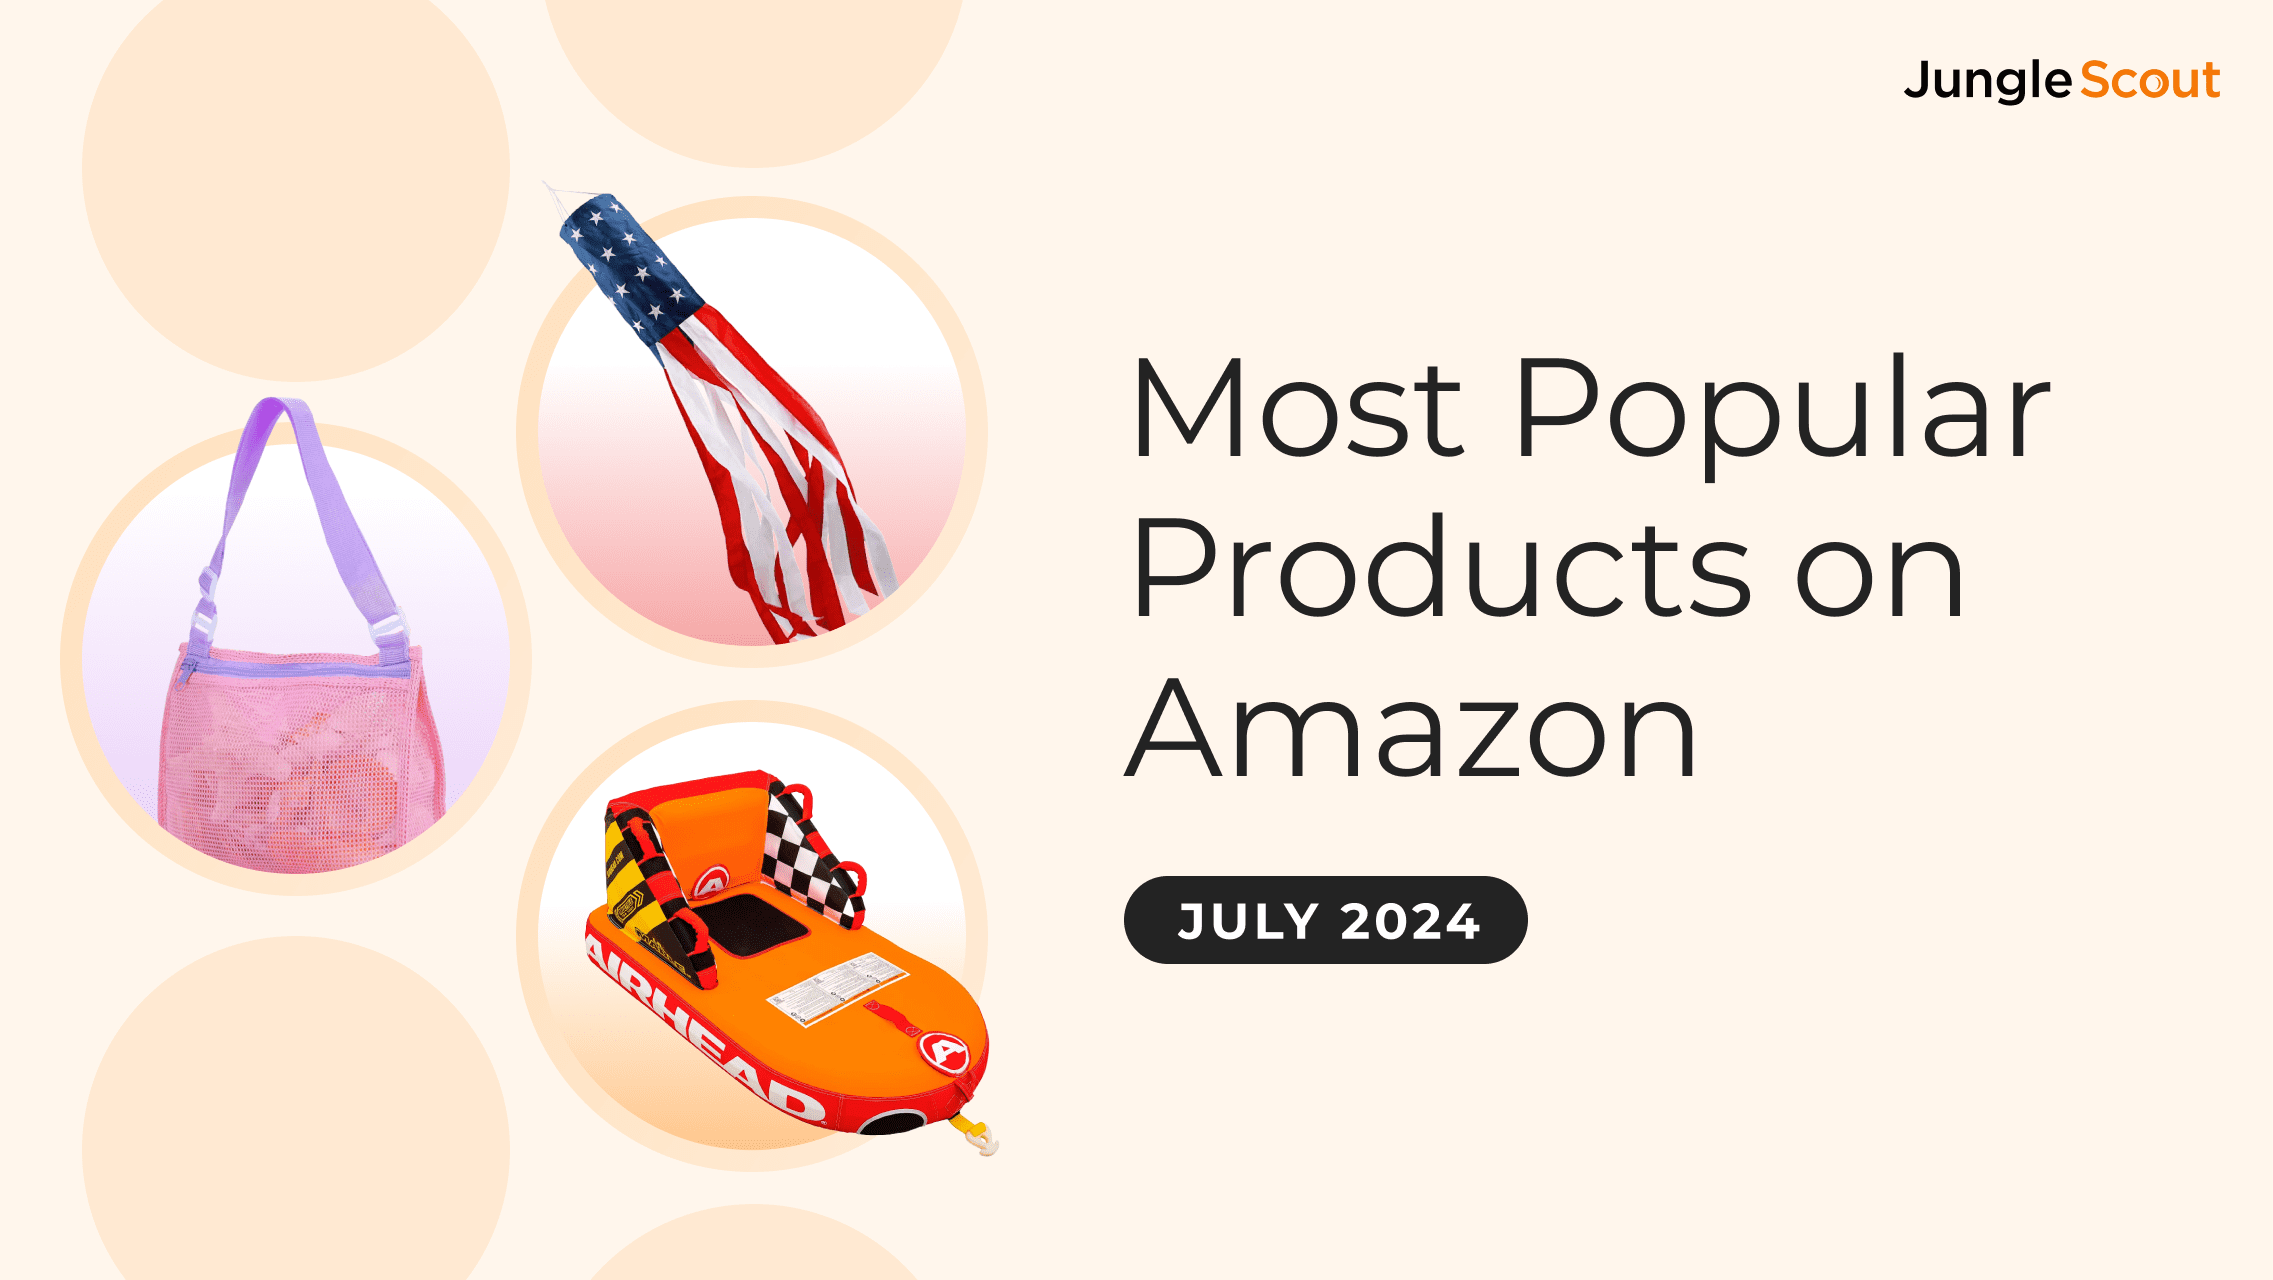 Amazon Best Sellers and Trending Products in July 2024